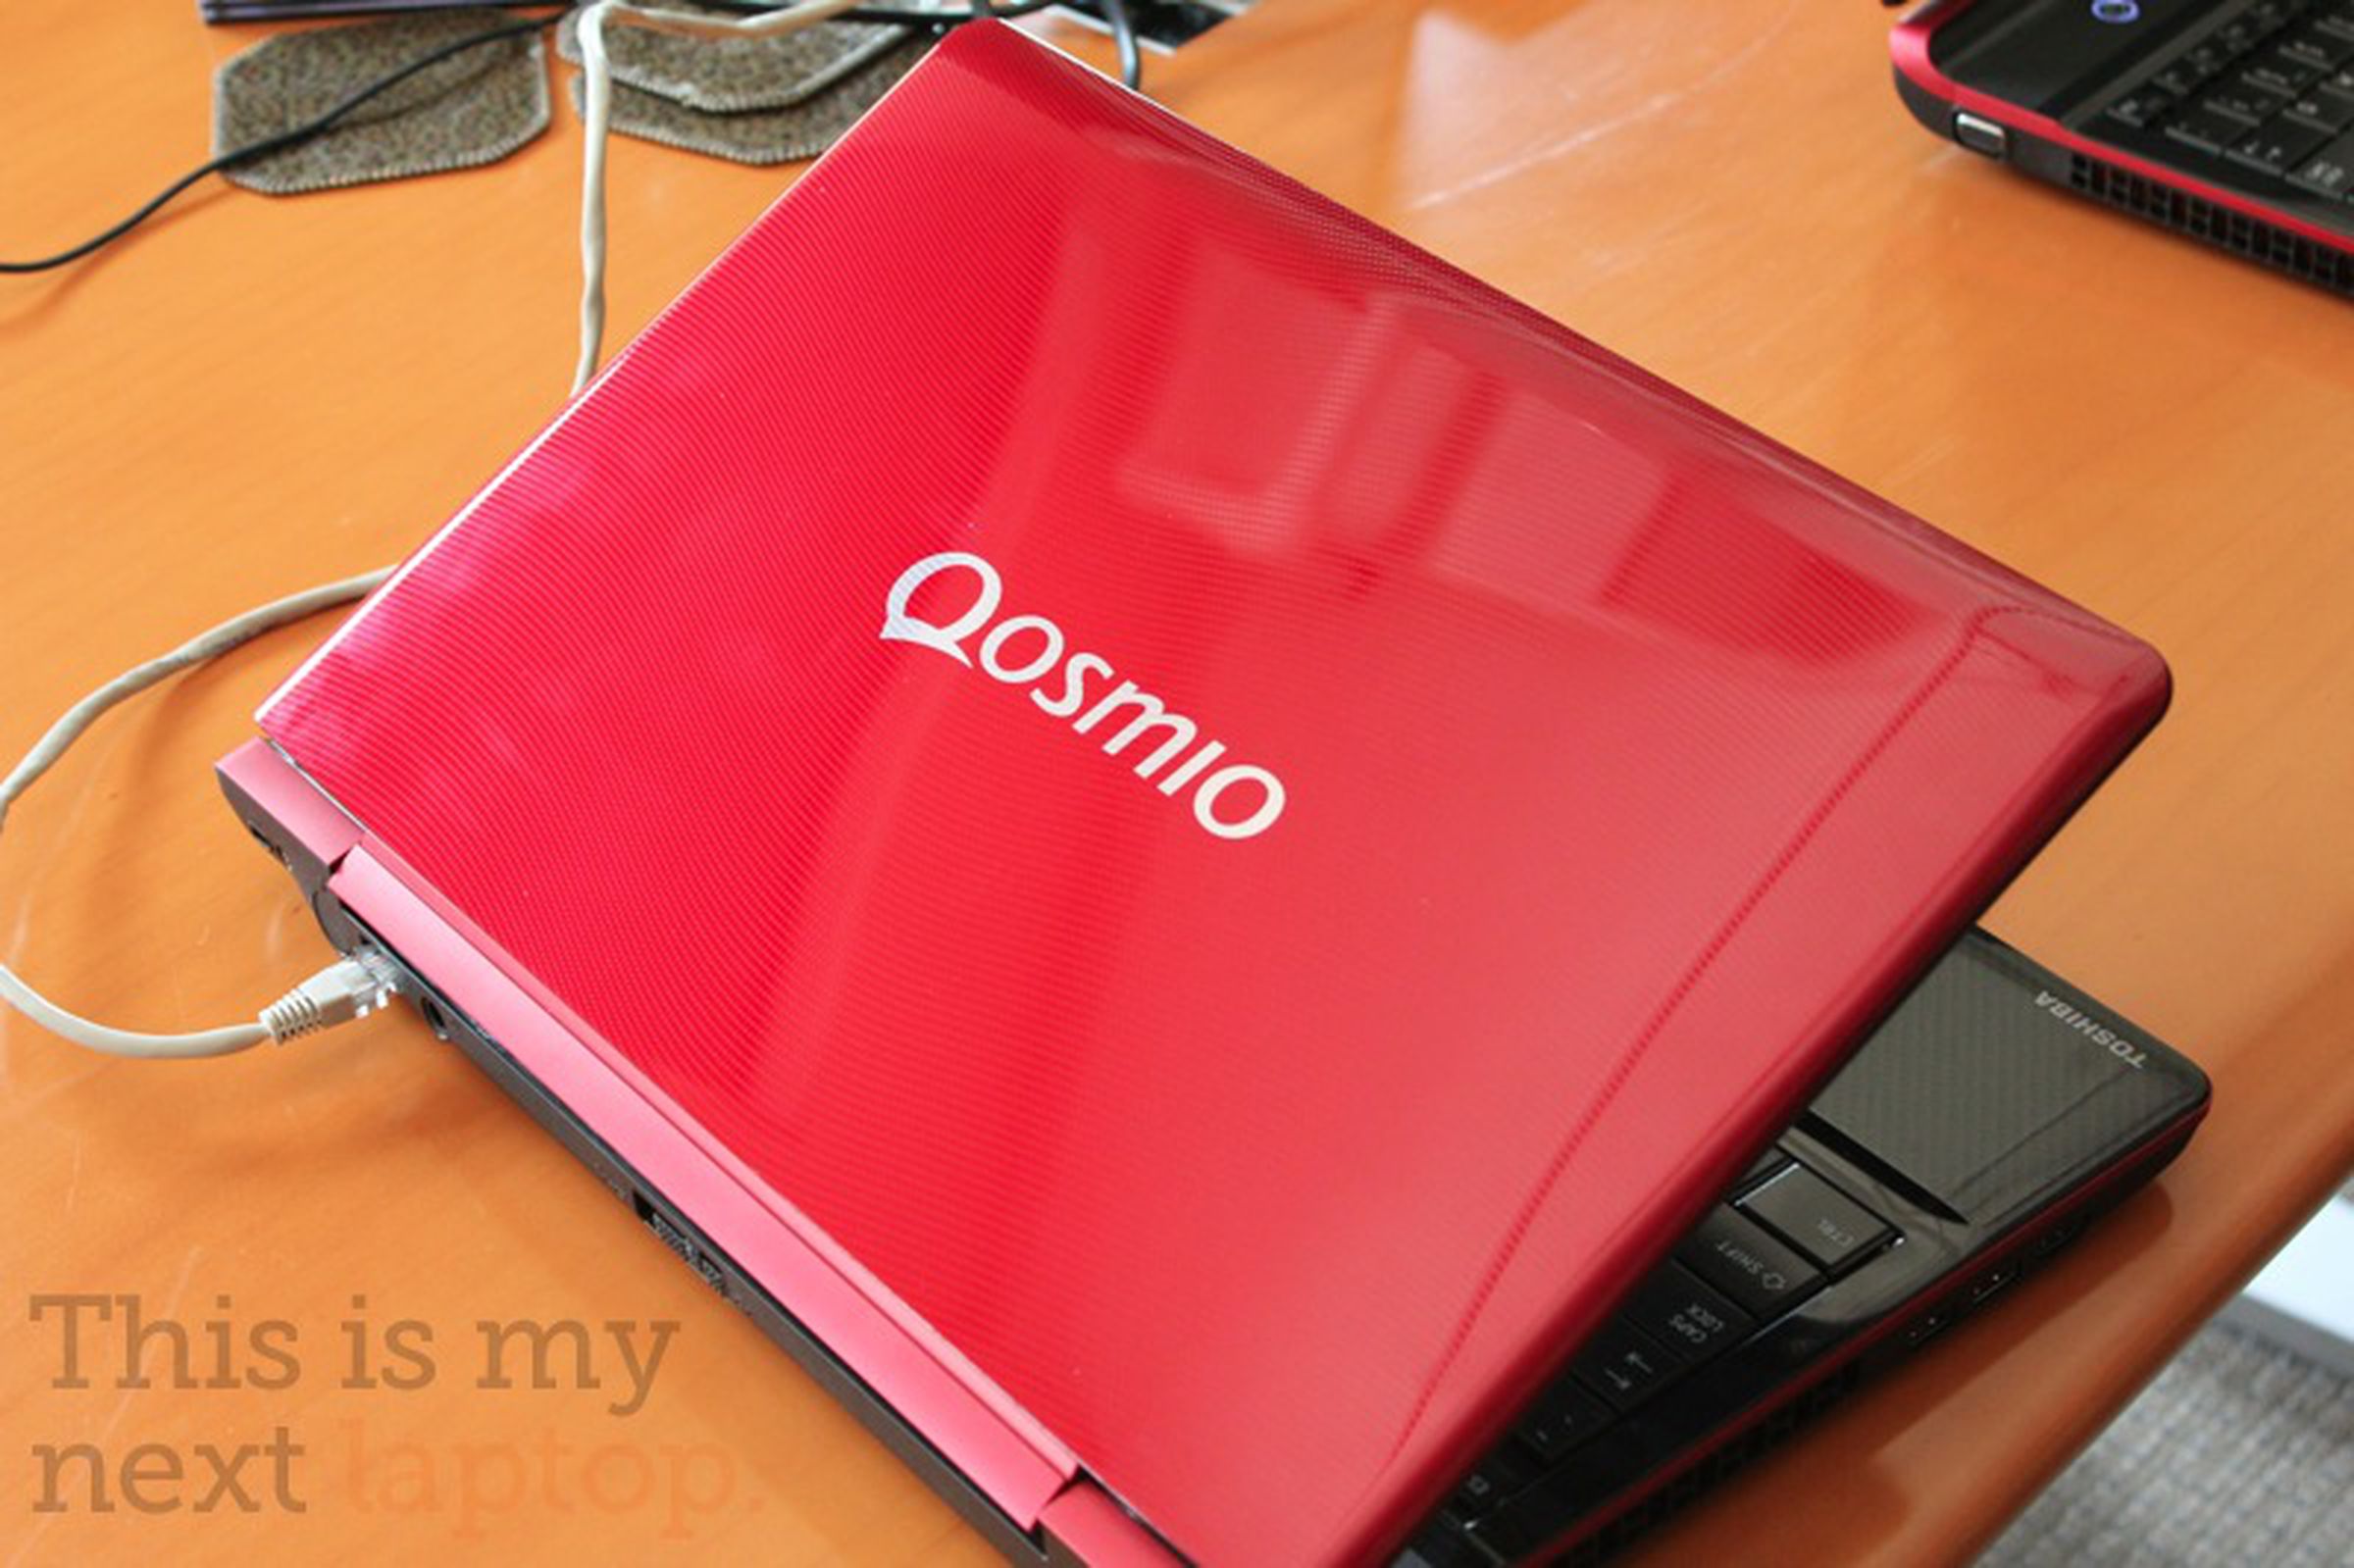 Toshiba’s glasses-free 3D Qosmio F755 arrives August 16th for $1,699 sans gaming support